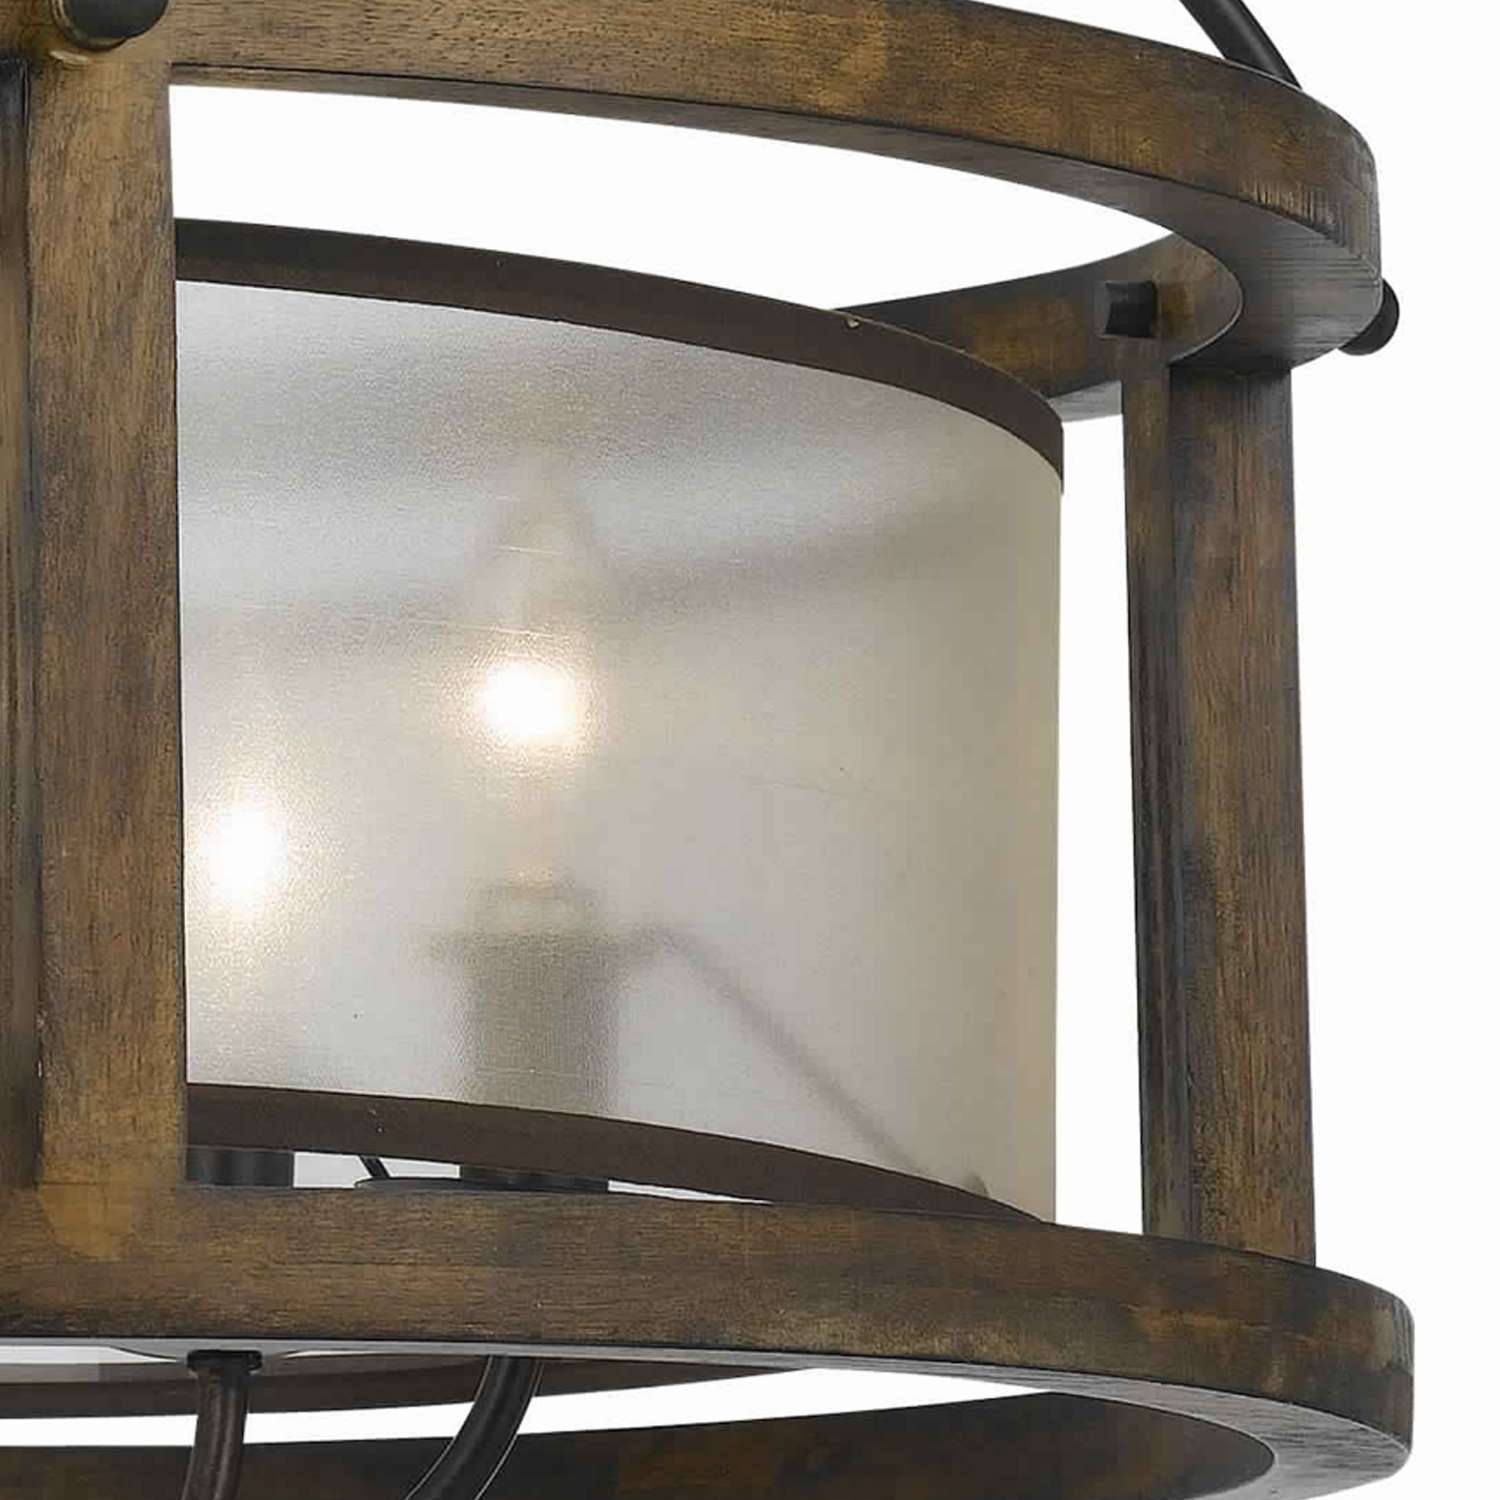 5 Bulb Round Chandelier With Wooden Frame And Organza Striped Shade, Brown By Benzara